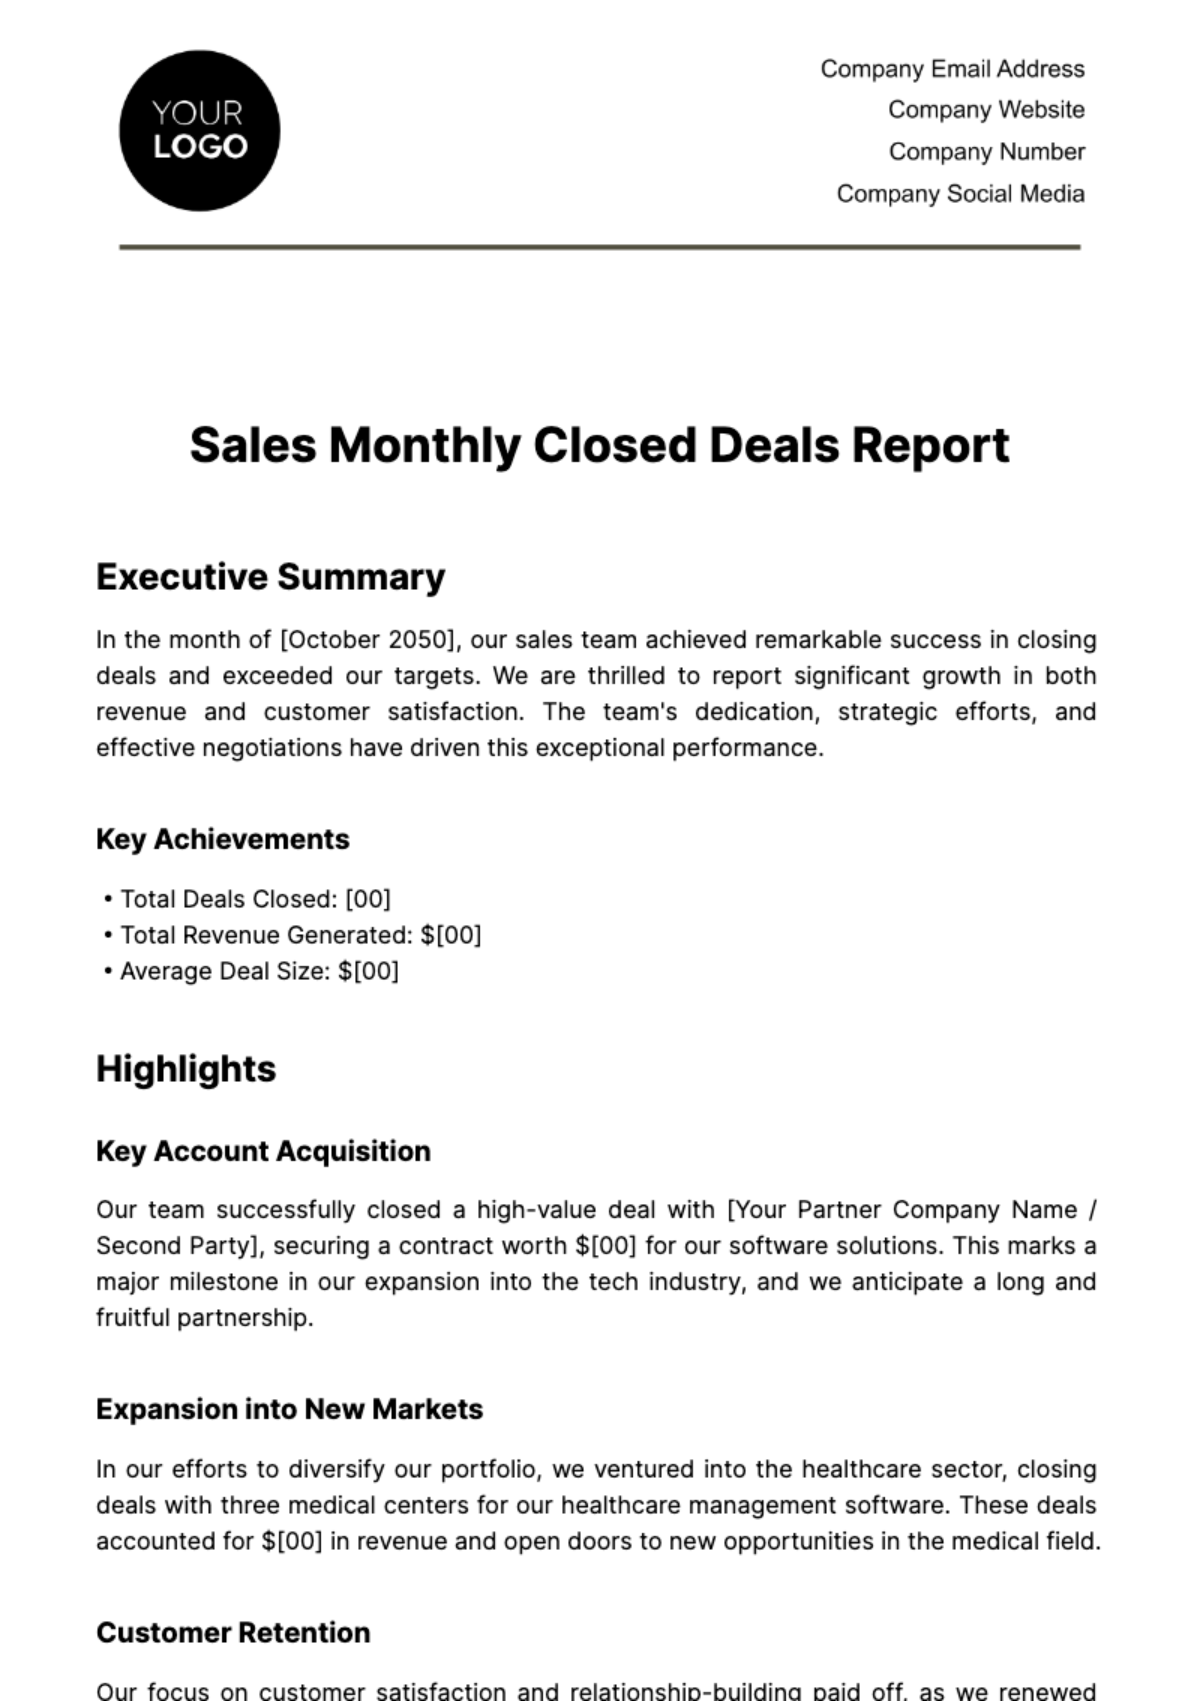 Free Sales Monthly Closed Deals Report Template